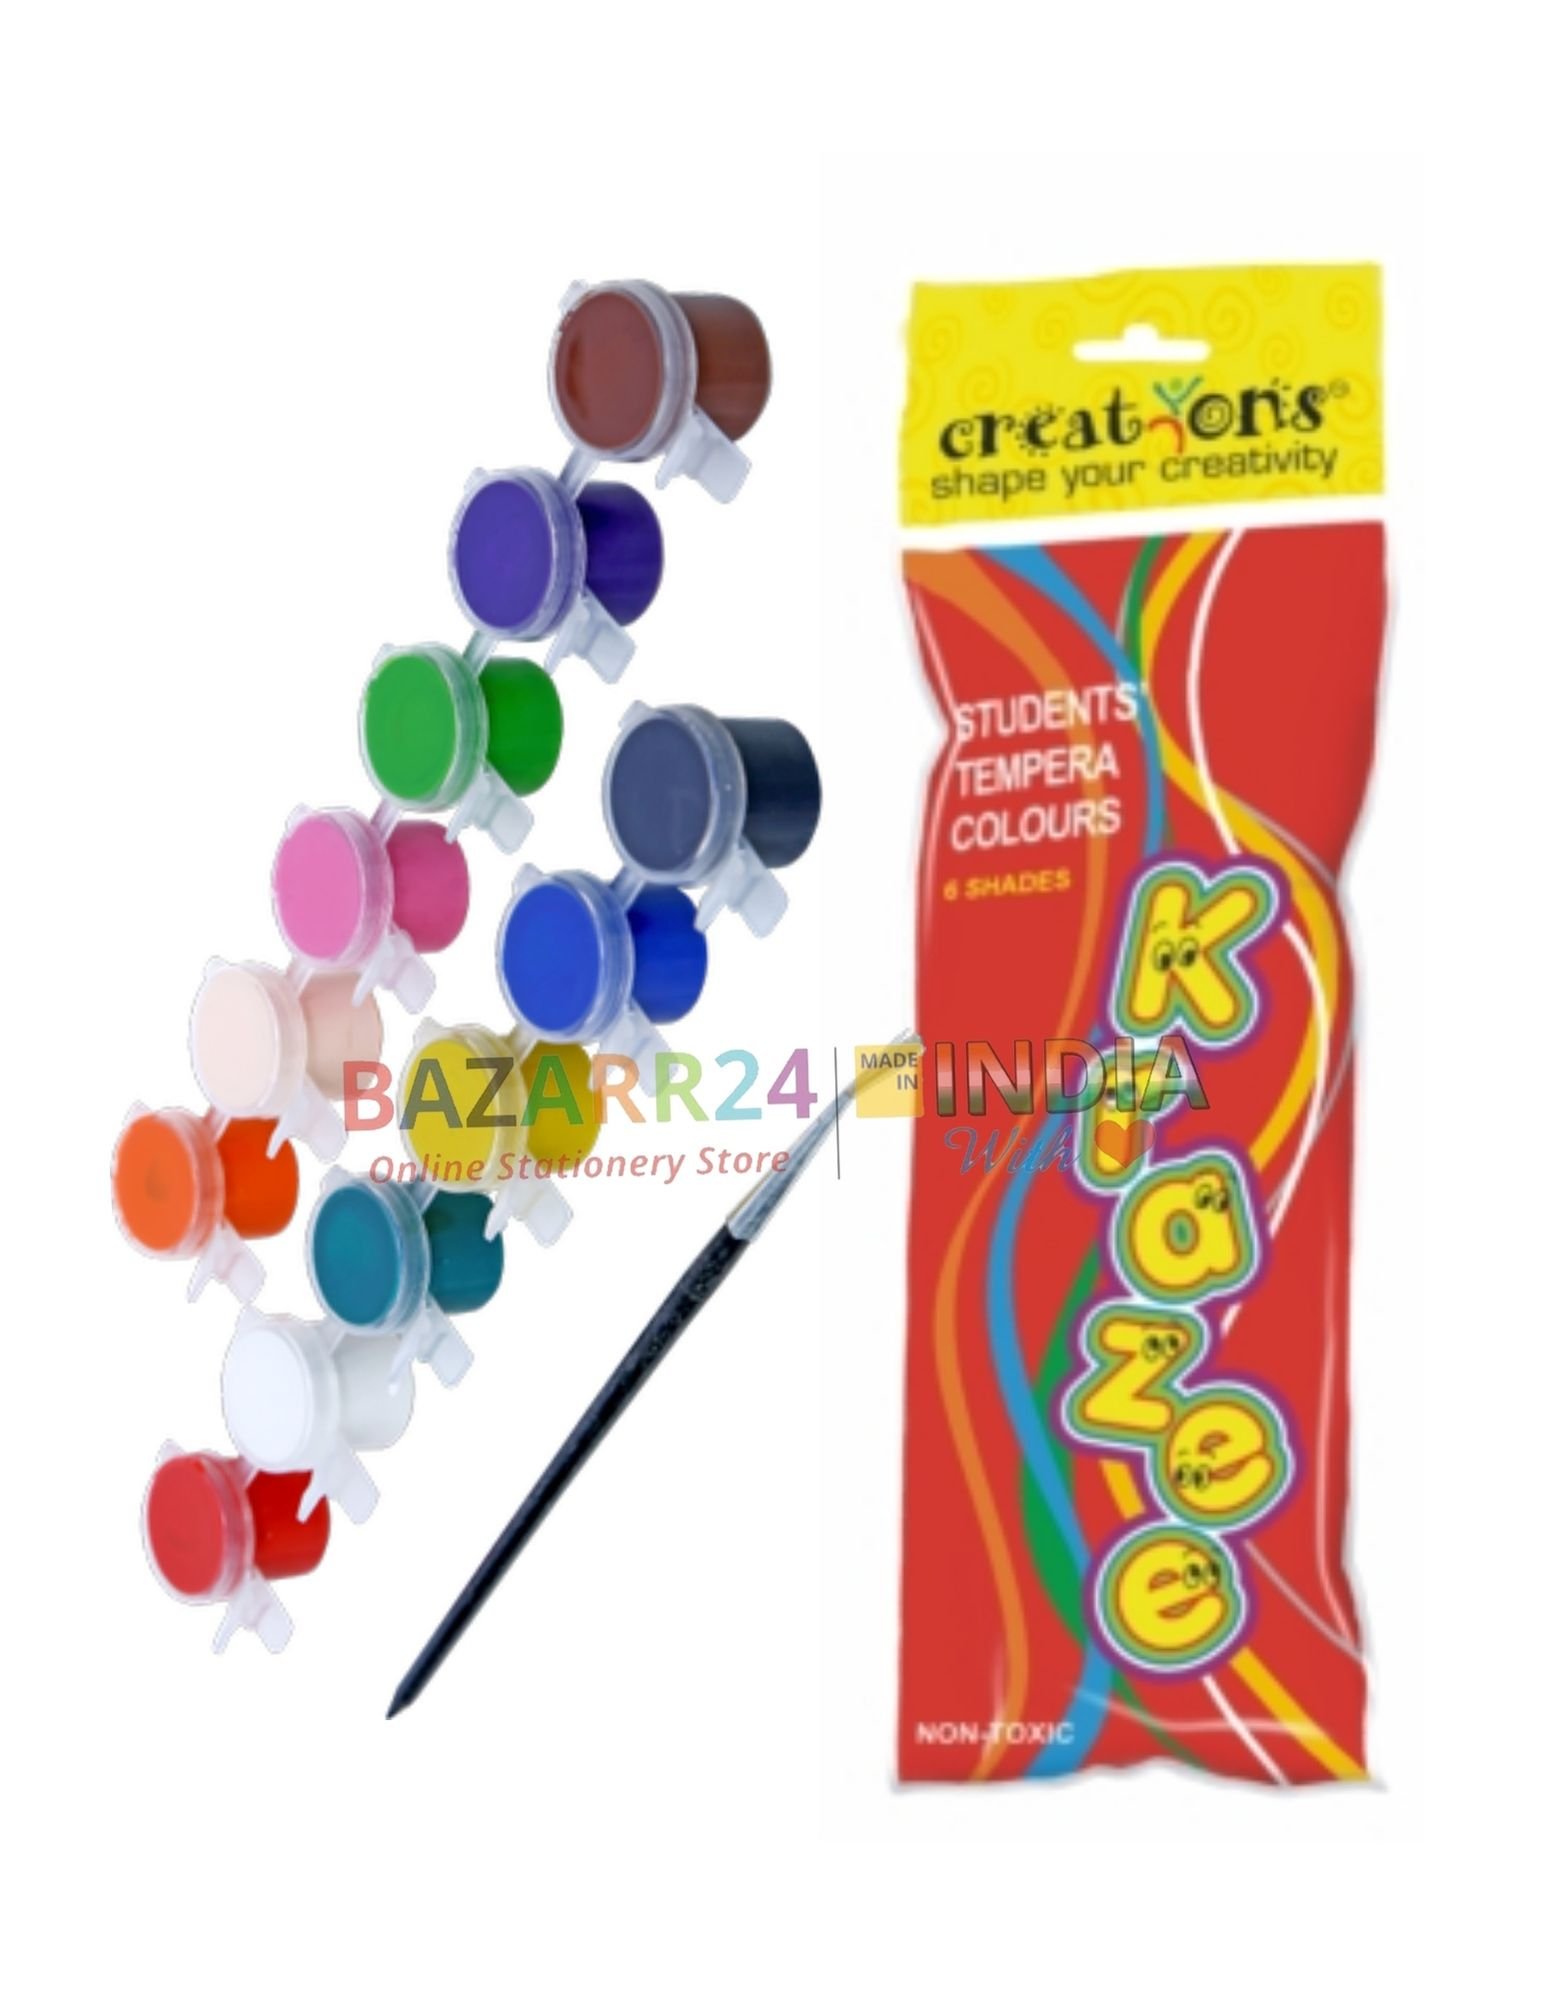 Creations Krazee Tempera Colors 12 Shades